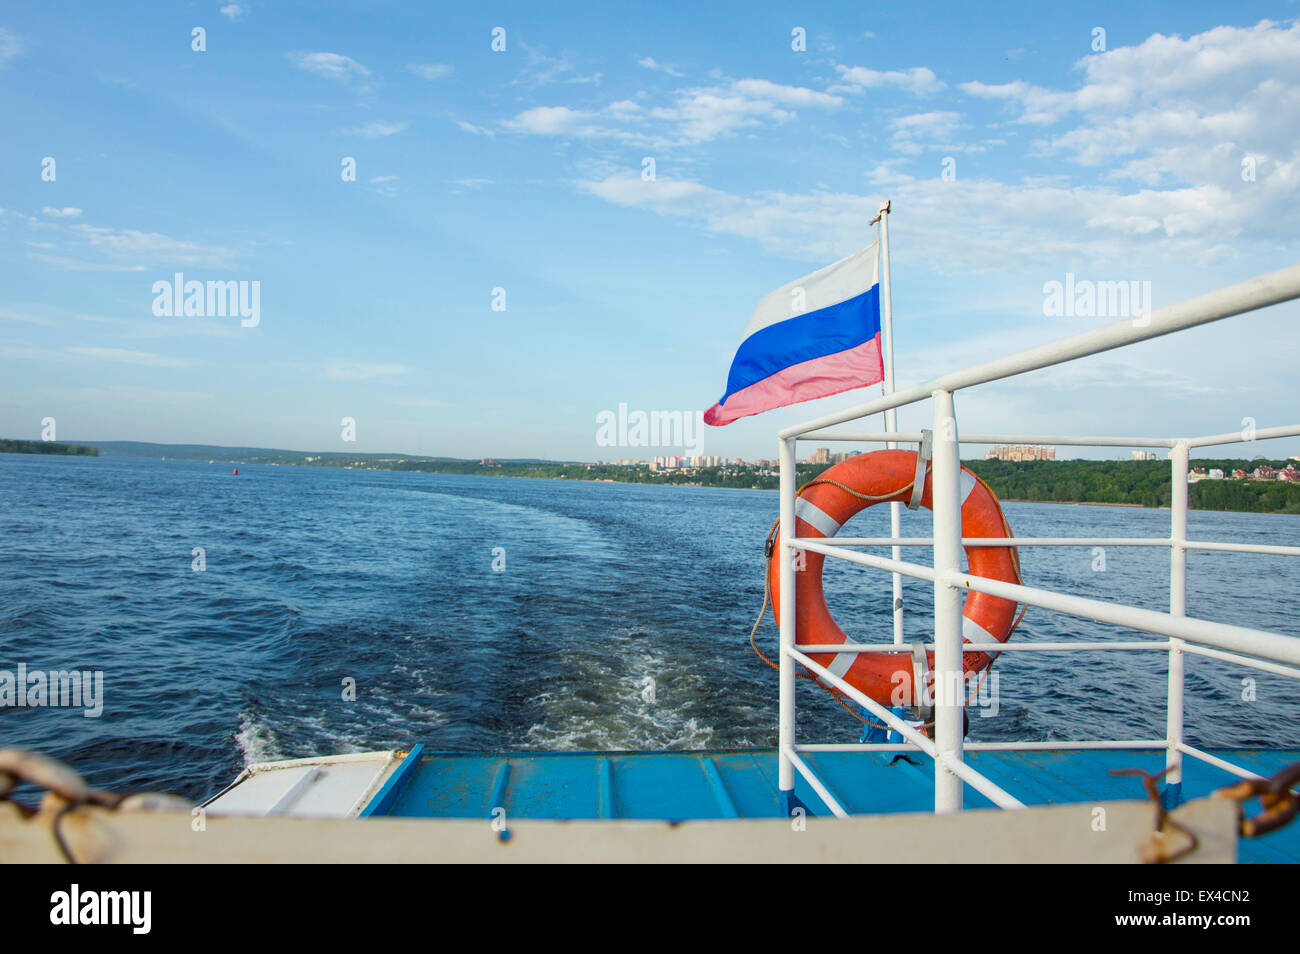 closeup of the flag on the stern of a recreational boat and the city in the background Stock Photo